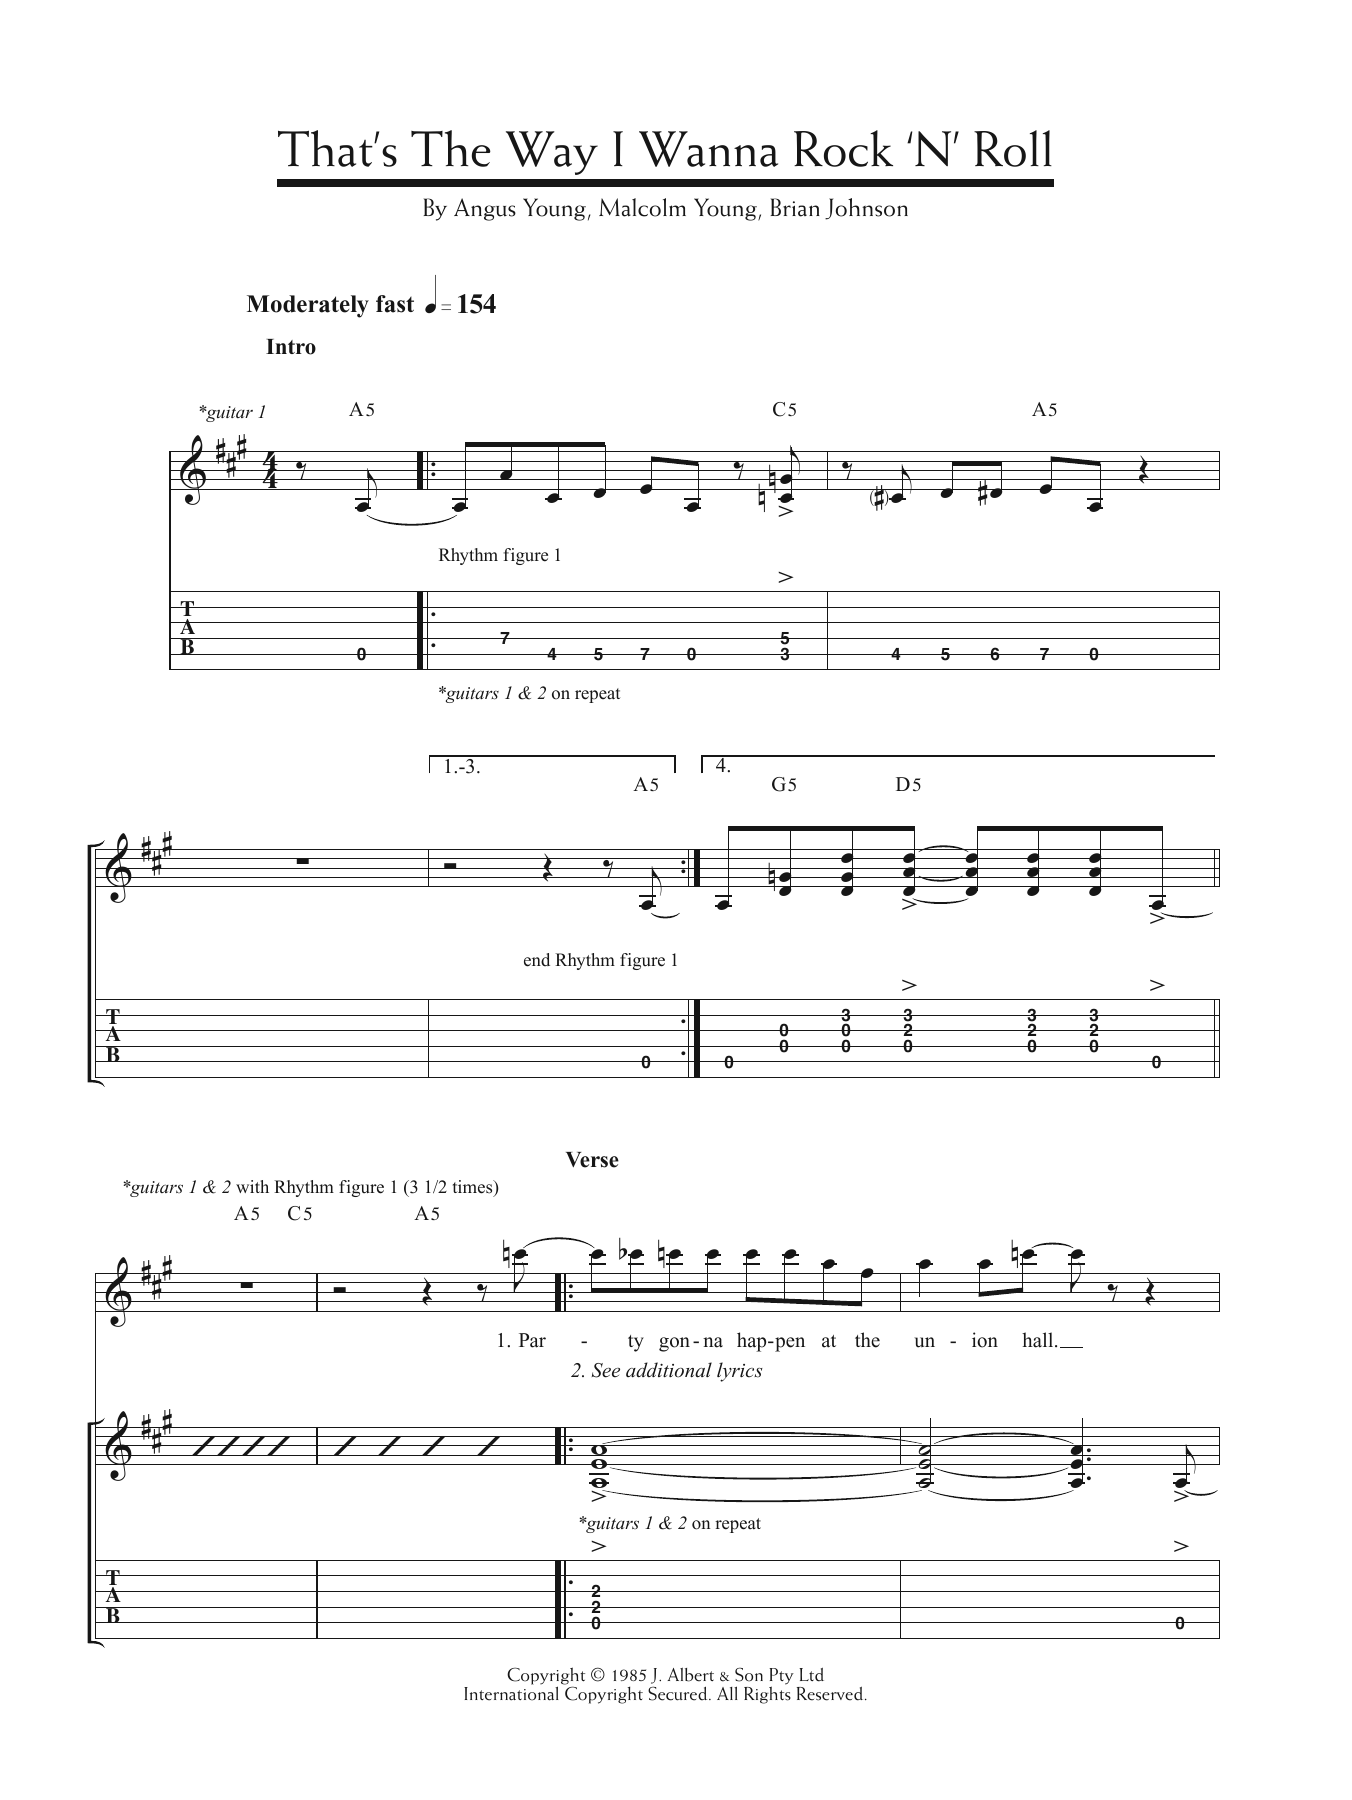 Download AC/DC That's The Way I Wanna Rock 'n' Roll Sheet Music